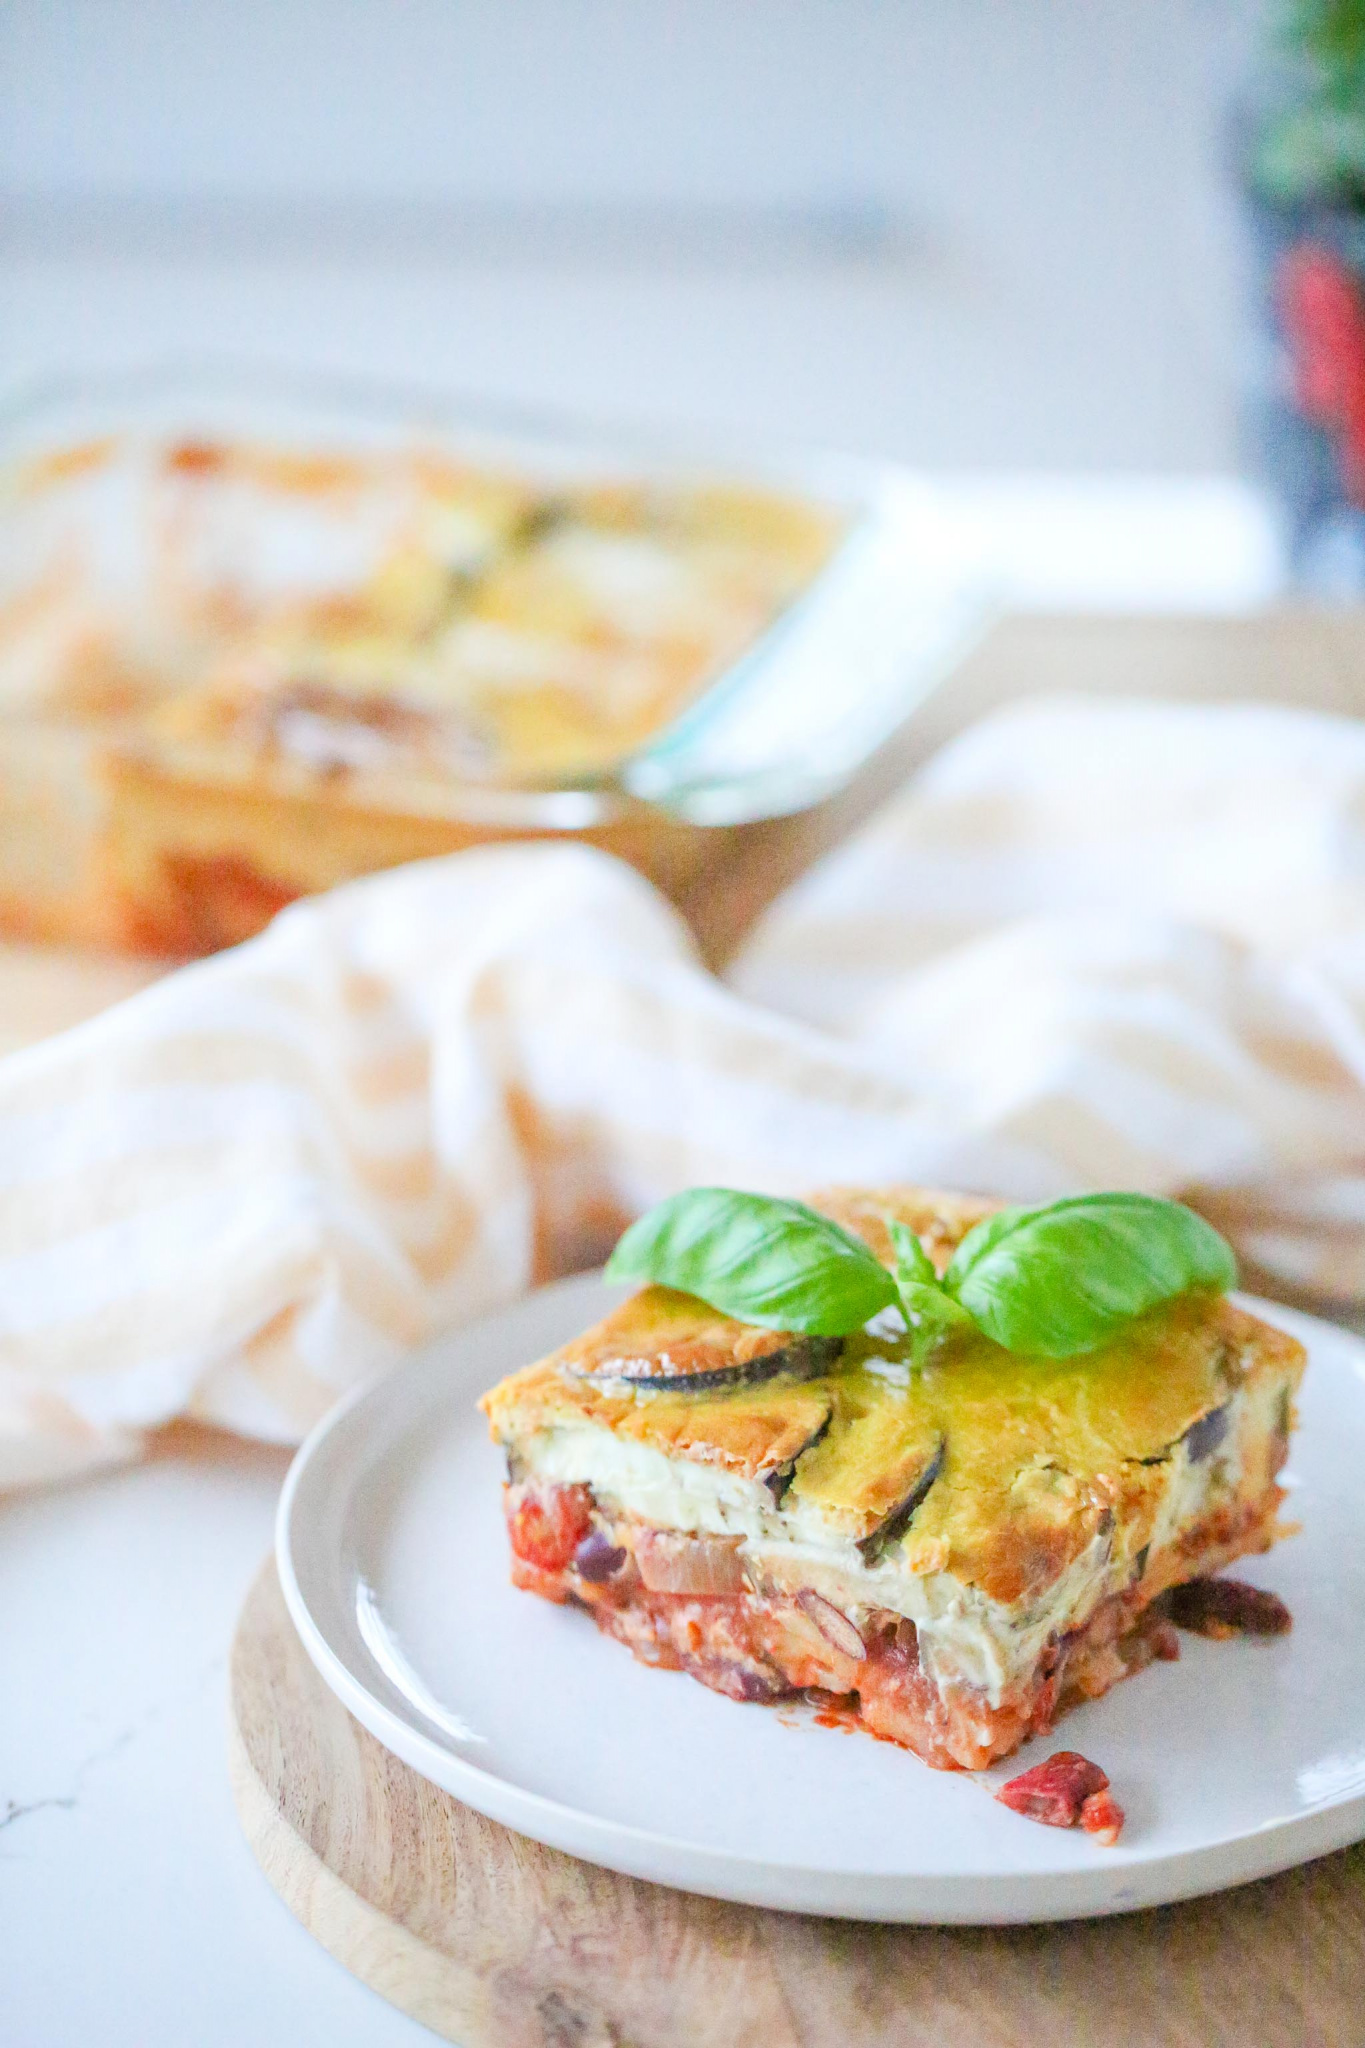 Glorious Greek Moussaka on white plate with basil leaf